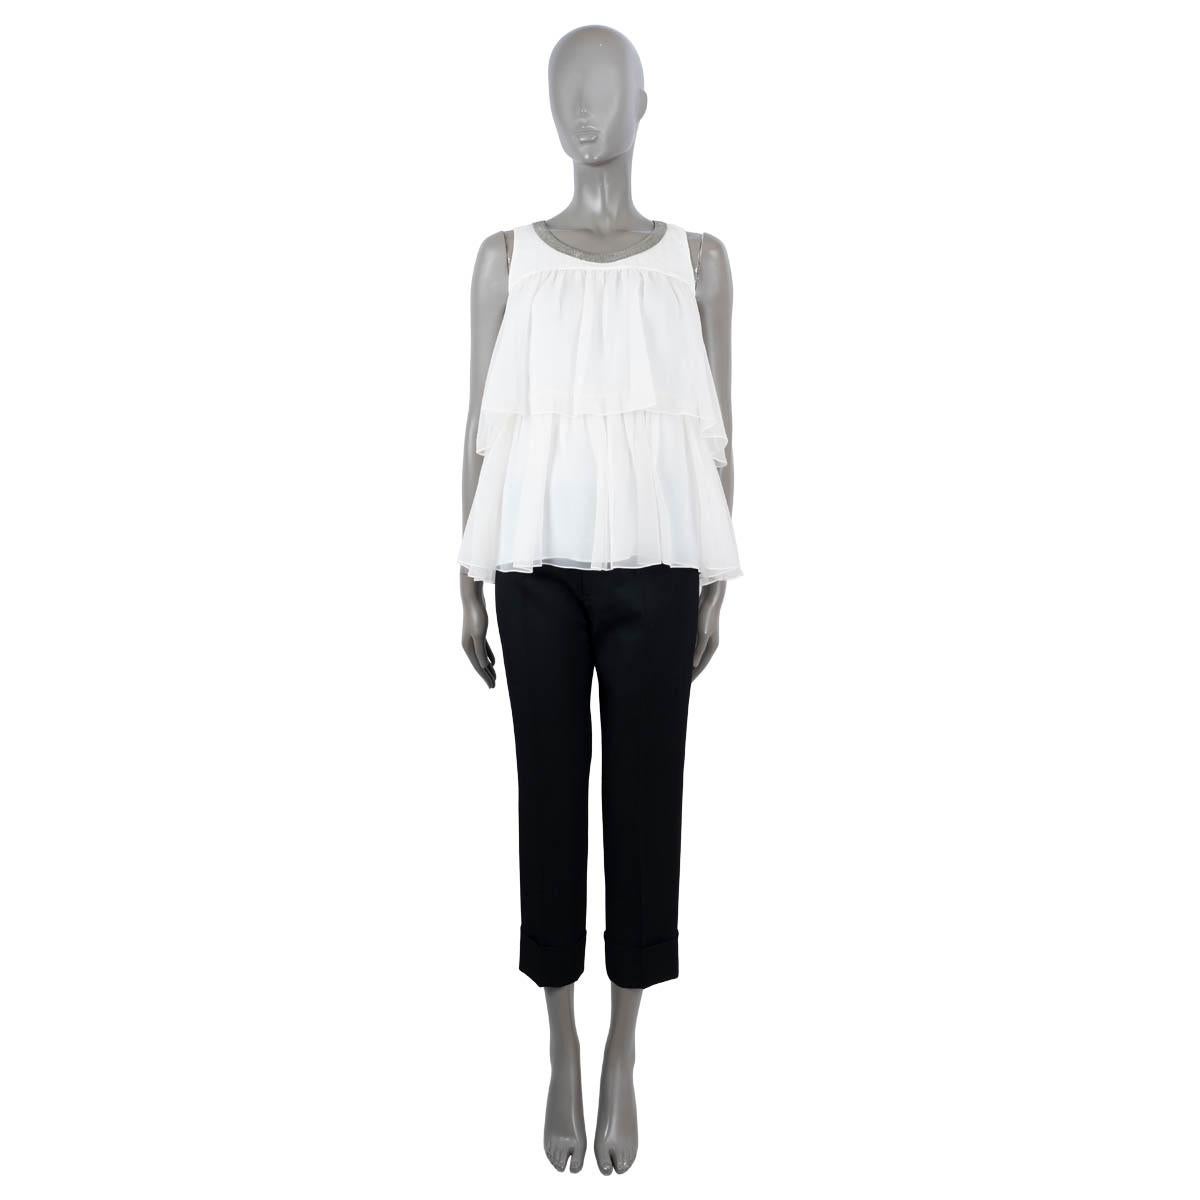 100% authentic Brunello Cucinelli sleeveless top in white silk (100%). Features Monili trim along the neck and two layers of ruffled chiffon. Opens with a concealed button and a self-tie ribbon at the back neck. Unlined. Has been worn and is in